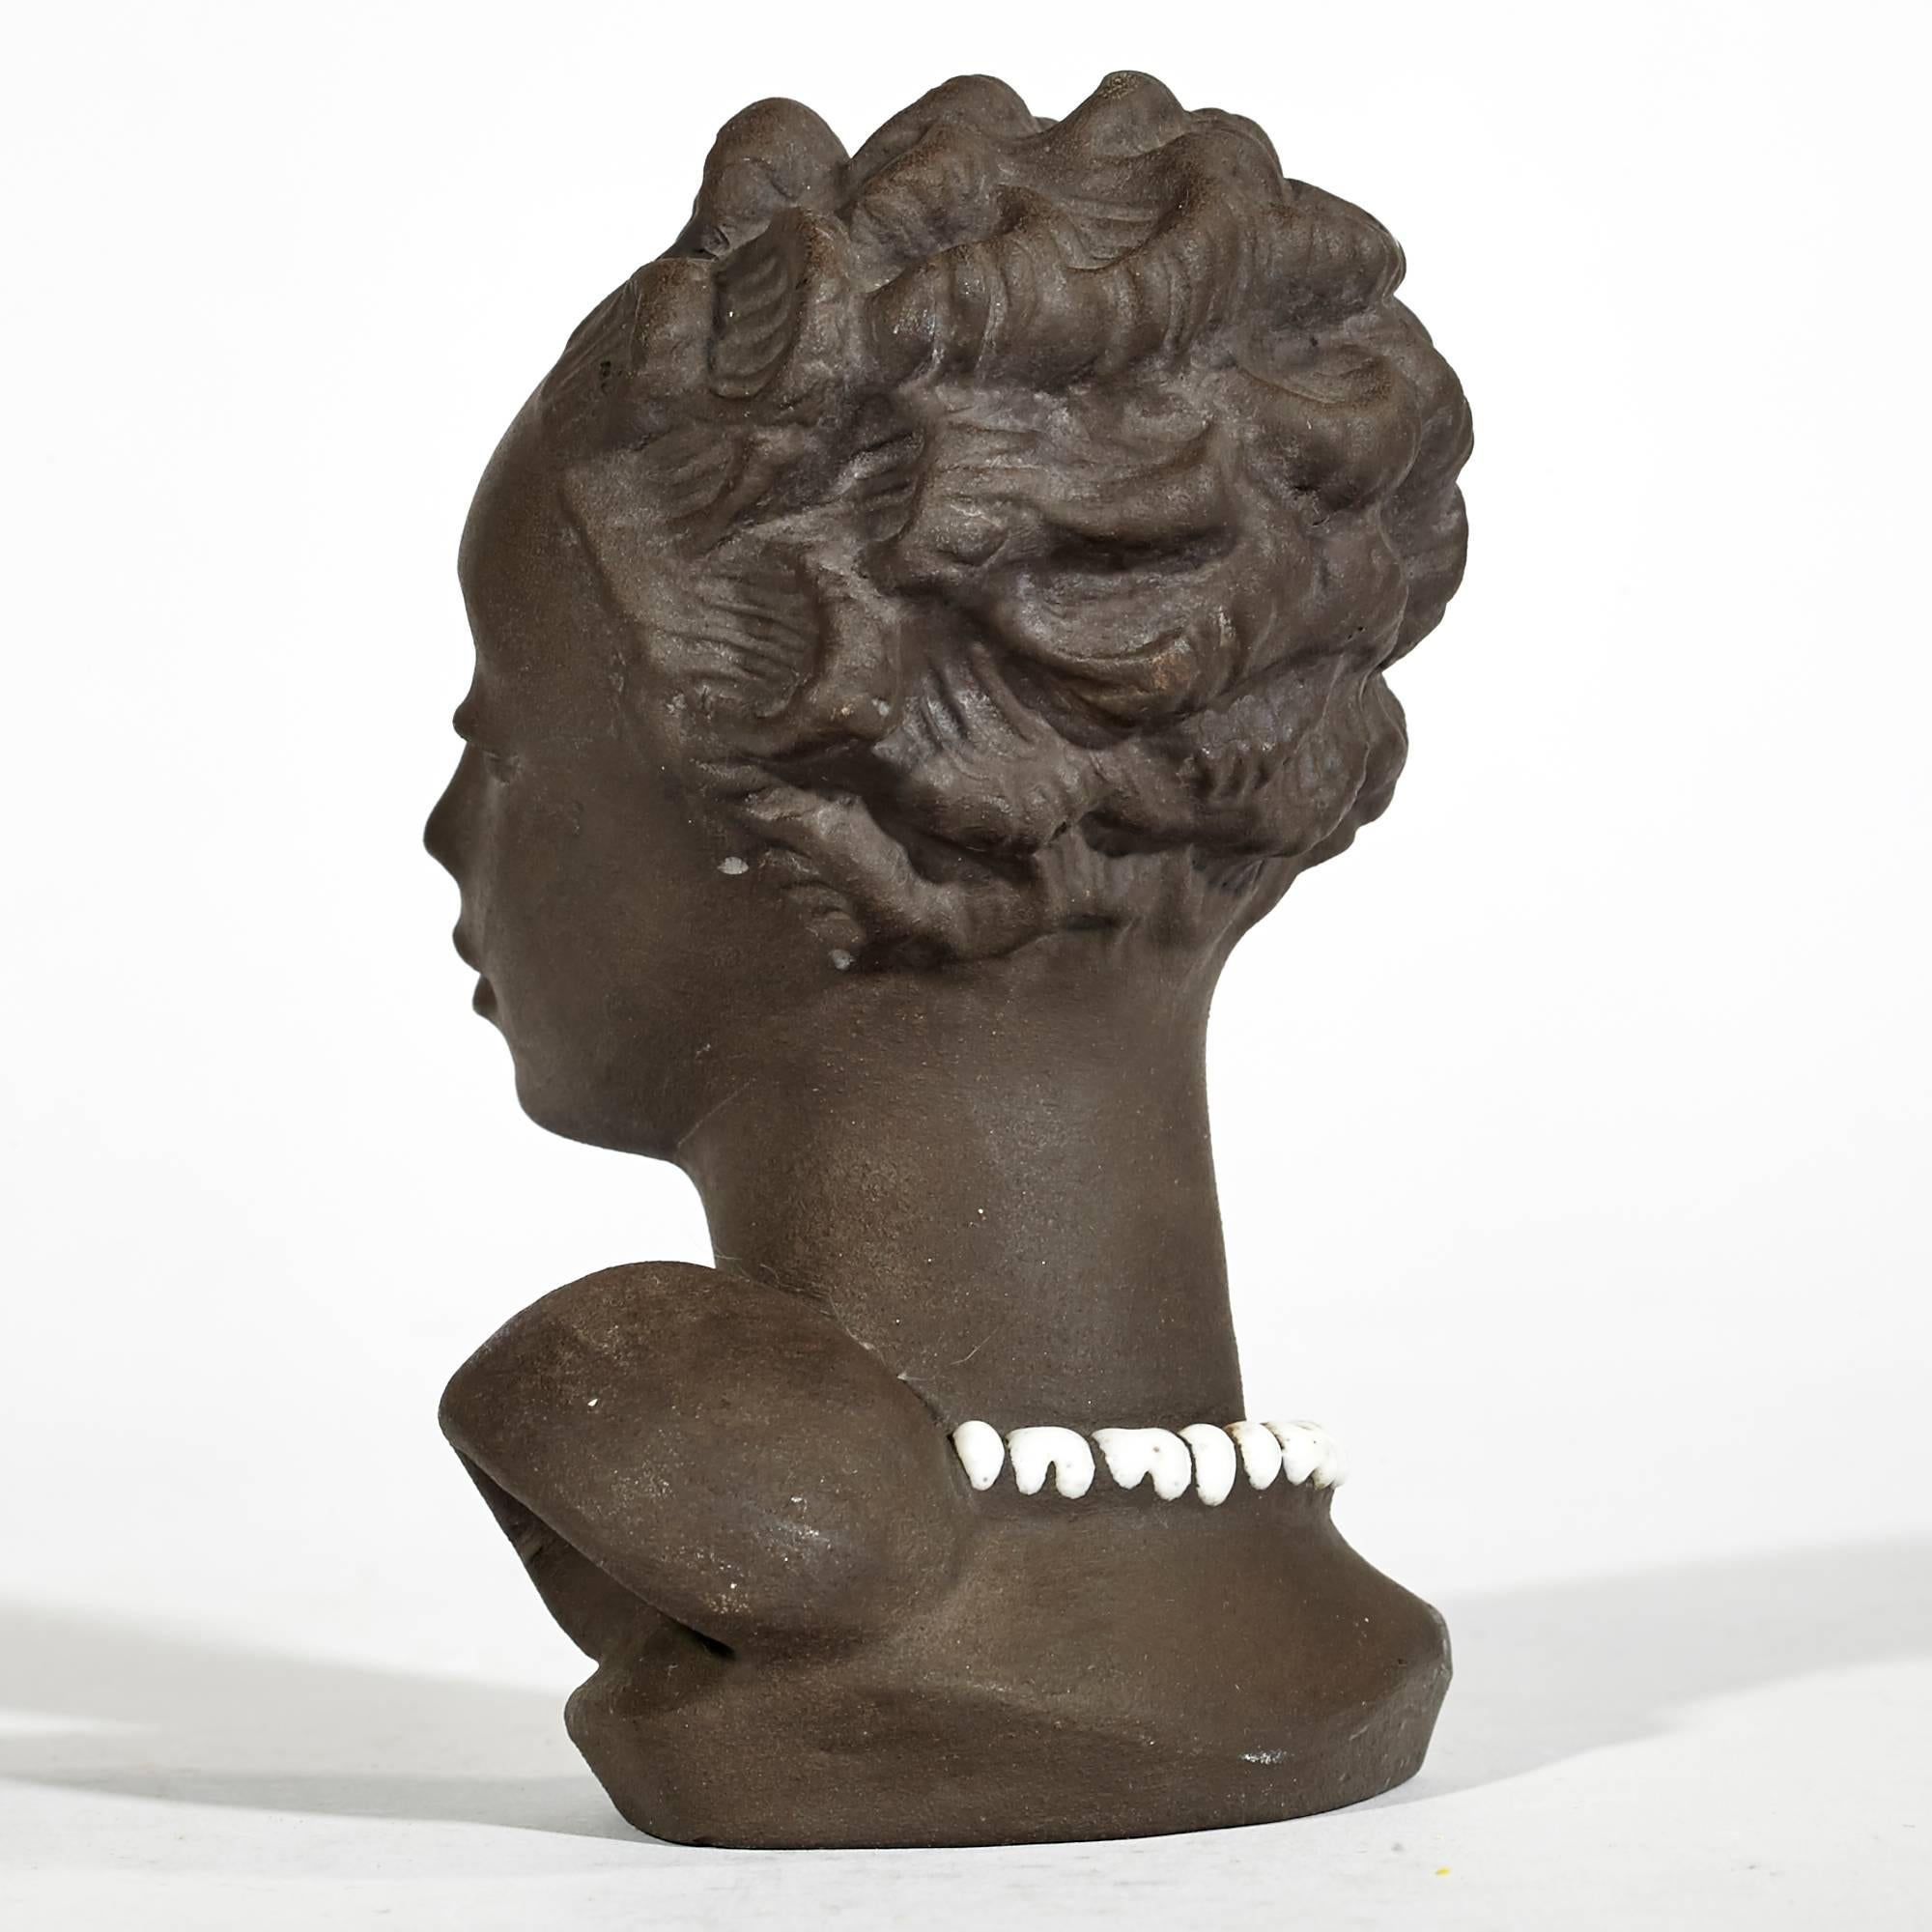 Vintage 1950s Marianne Starck designed black female bust with glazed white pearls on raw clay for Michael Andersen Studios, Bornholm Denmark. Possibly part of the "Tribal" line of pottery. Marked with the Studio shield and 4012-2